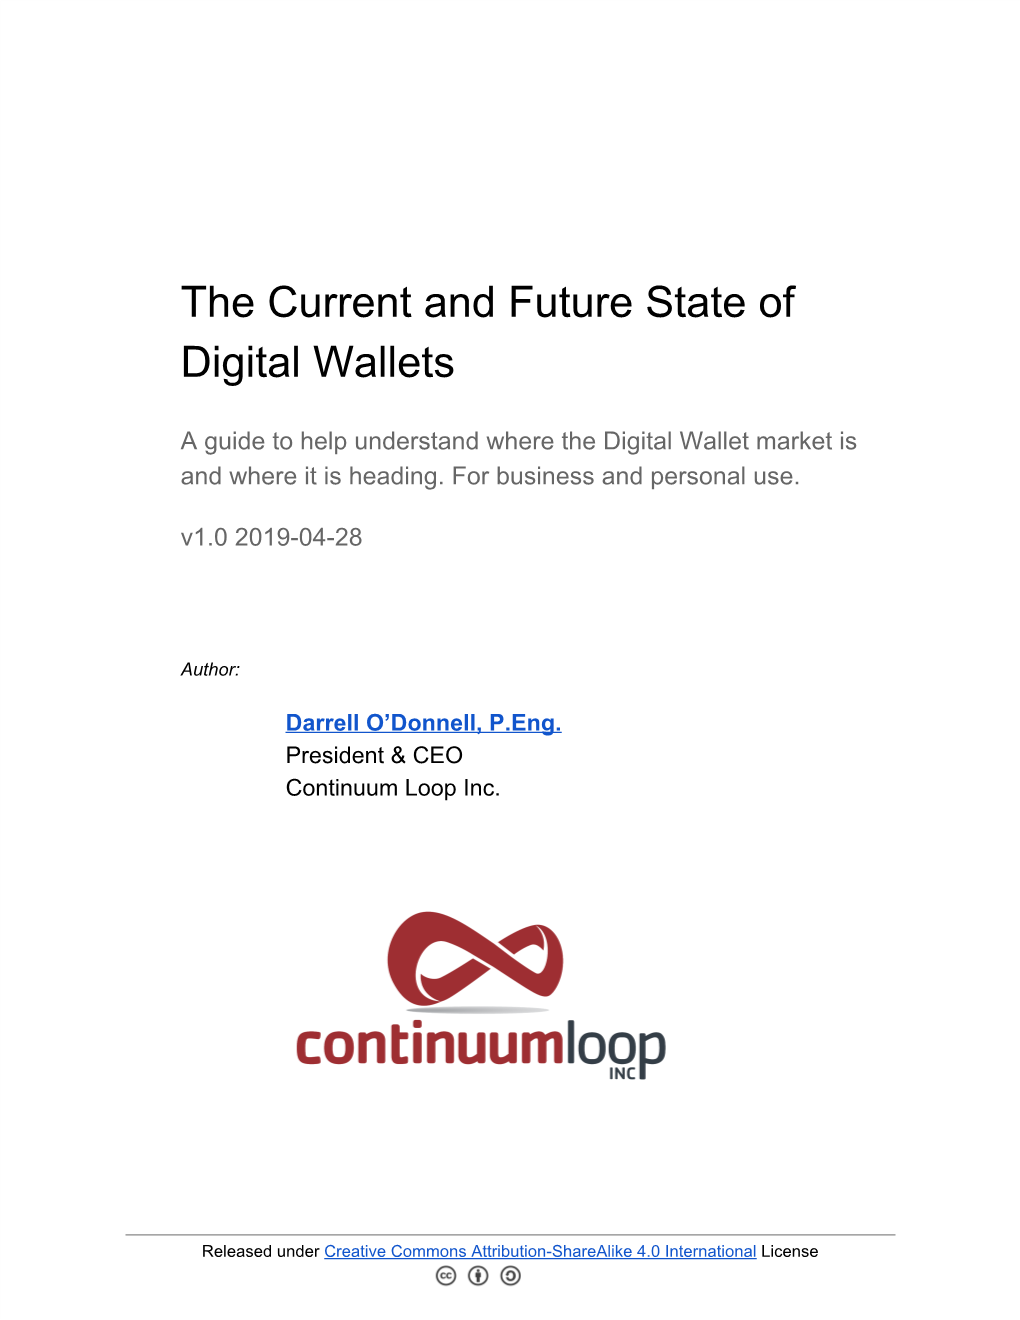 The Current and Future State of Digital Wallets